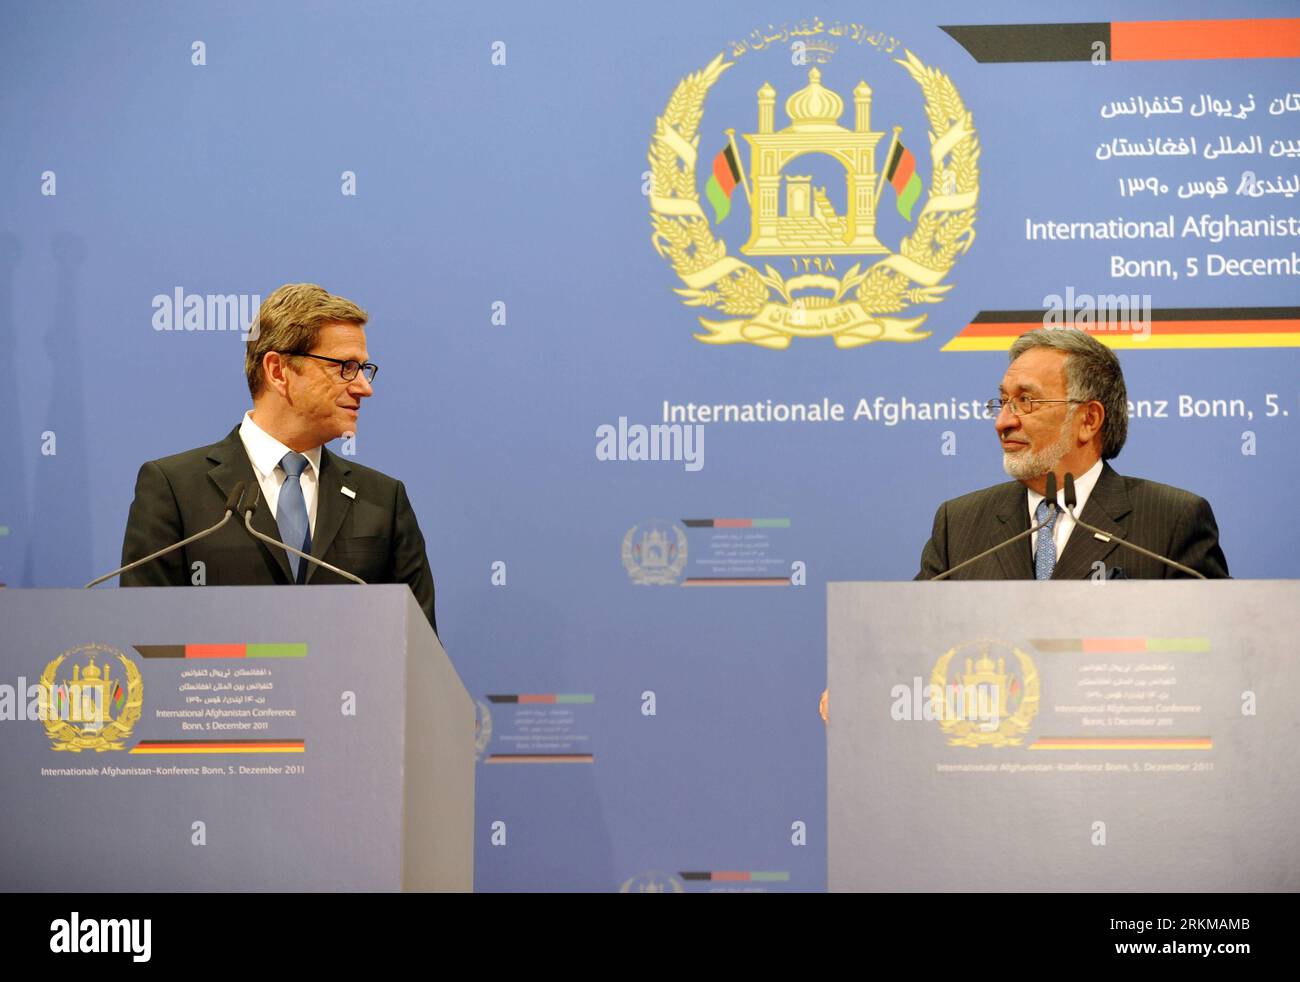 Bildnummer: 56635638  Datum: 05.12.2011  Copyright: imago/Xinhua (111206) -- BONN, Dec. 6, 2011 (Xinhua) -- German Foreign Minister Guido Westerwelle (L) and Afghan Foreign Minister Zalmay Rassoul attend a press conference in Bonn, Germany, Dec. 5, 2011. The 2011 Bonn conference, hosted by Germany and chaired by Afghan President Hamid Karzai, pledged sustained support to Afghanistan for another decade after NATO combat troops are withdrawn from the country in 2014. (Xinhua/Ma Ning) (zf) GERMANY-BONN-CONFERENCE-AFGHANISTAN PUBLICATIONxNOTxINxCHN People Politik Konferenz Afghanistankonferenz PK Stockfoto